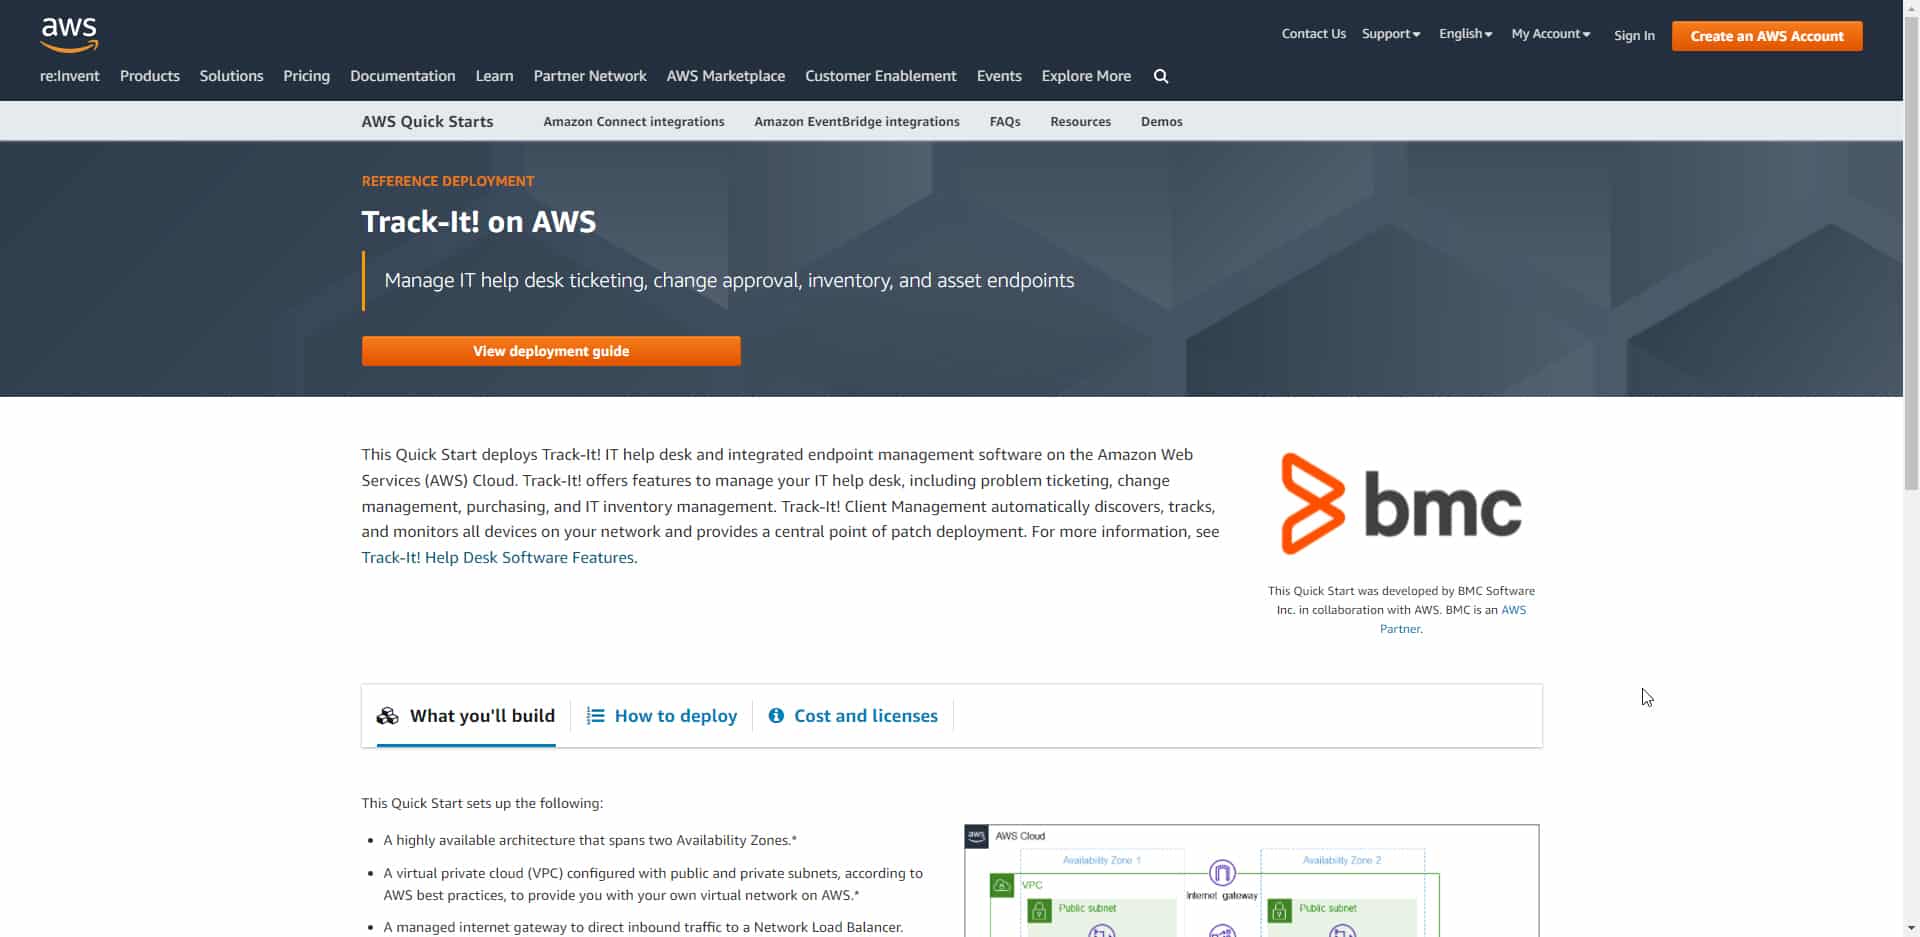 Help Desk in the Cloud – Track-It! Amazon Web Services Quick Start now available